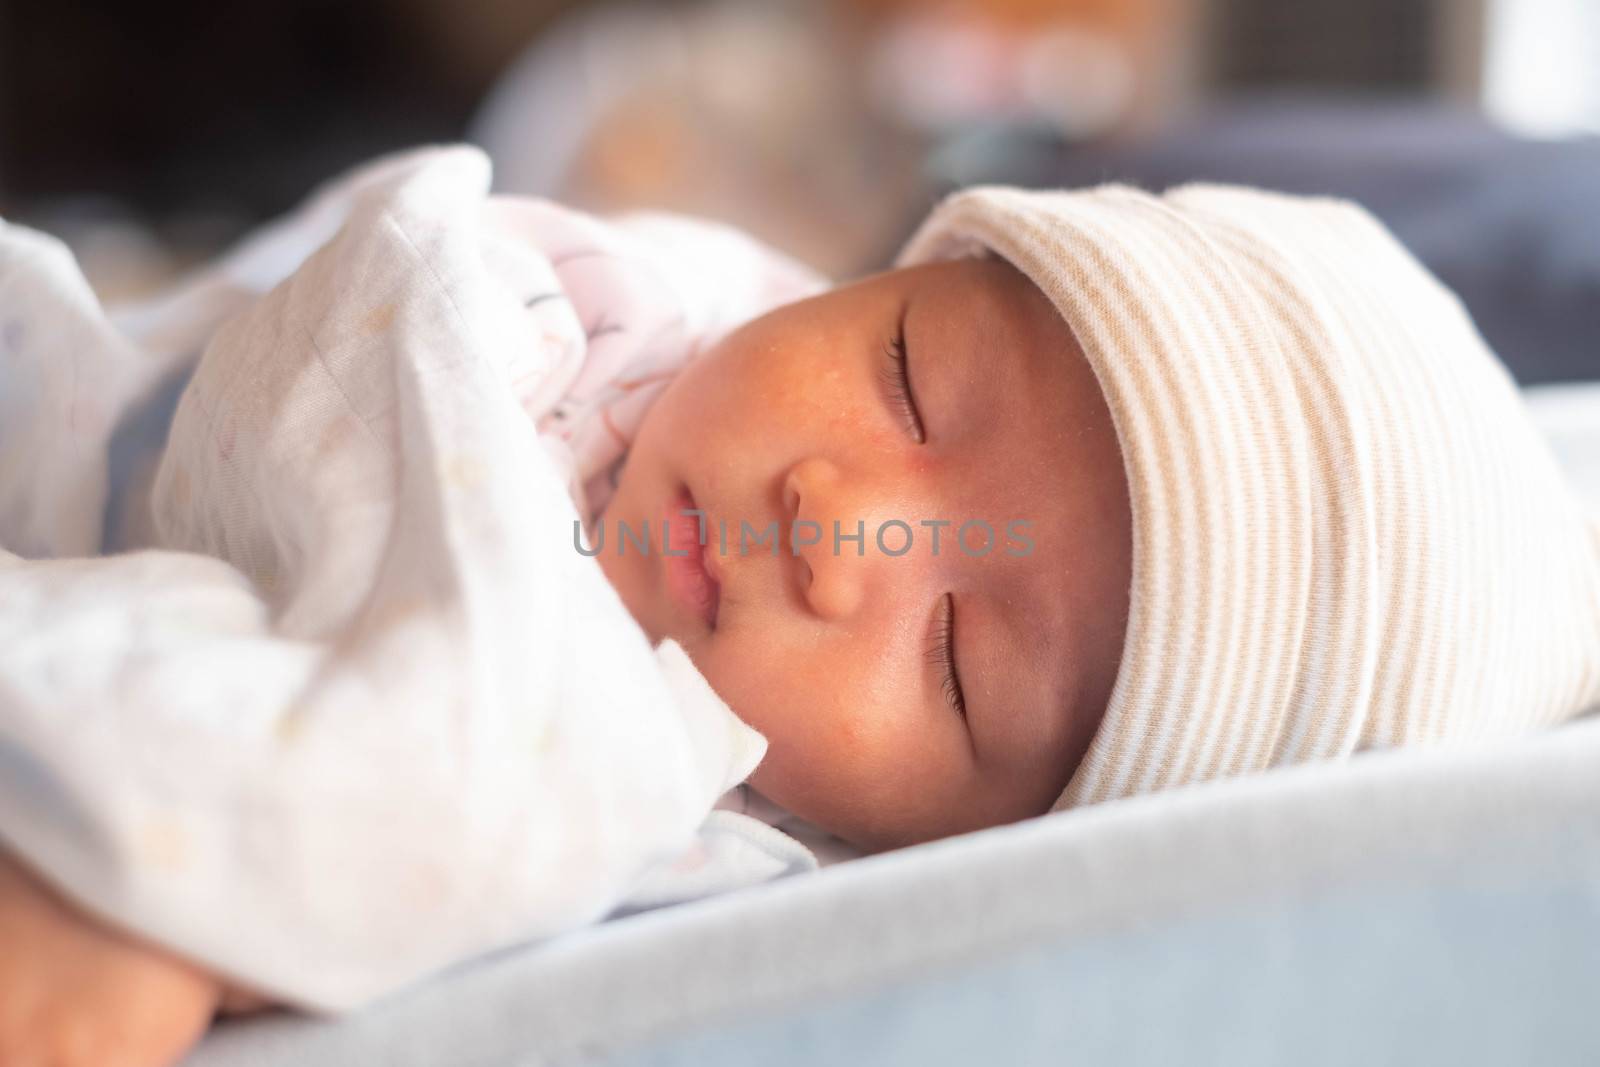 The Sleeping cute New Born Baby infant with hat on the bed
 by Bonn2210